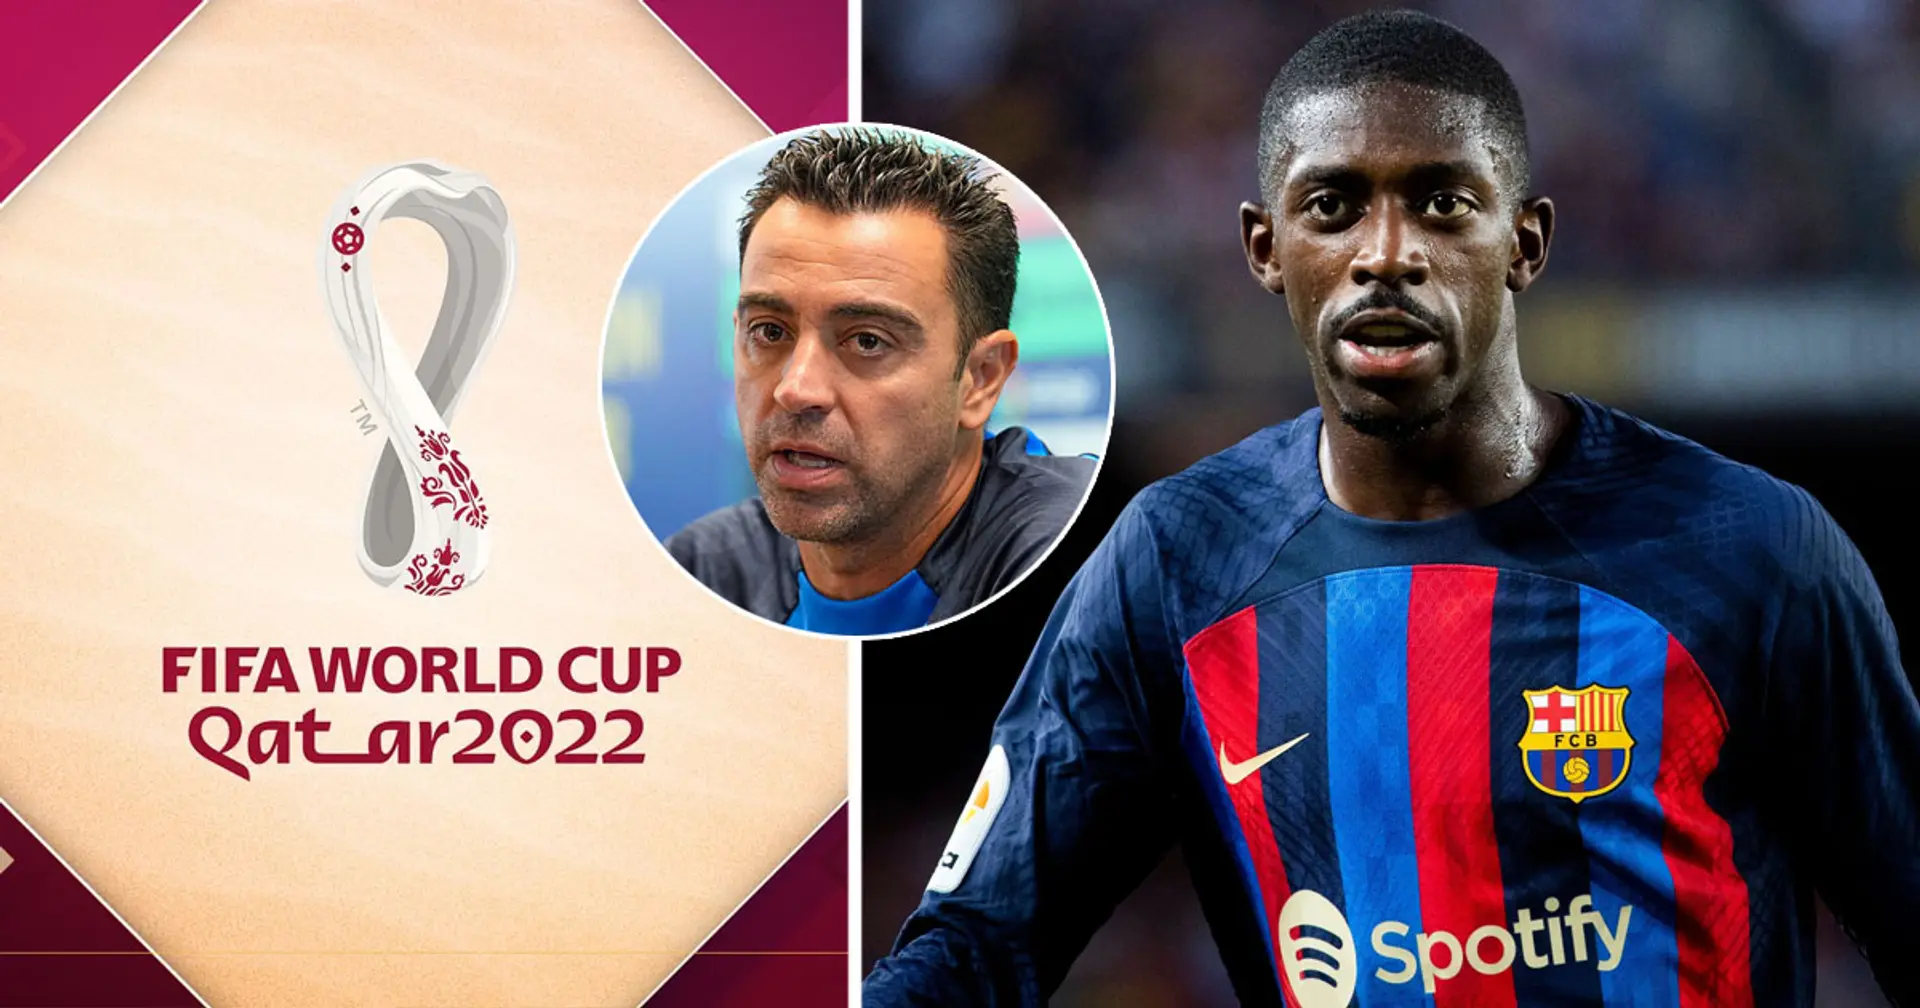 'ASAP': Barca want to extend Dembele's contract before World Cup for 2 key reasons